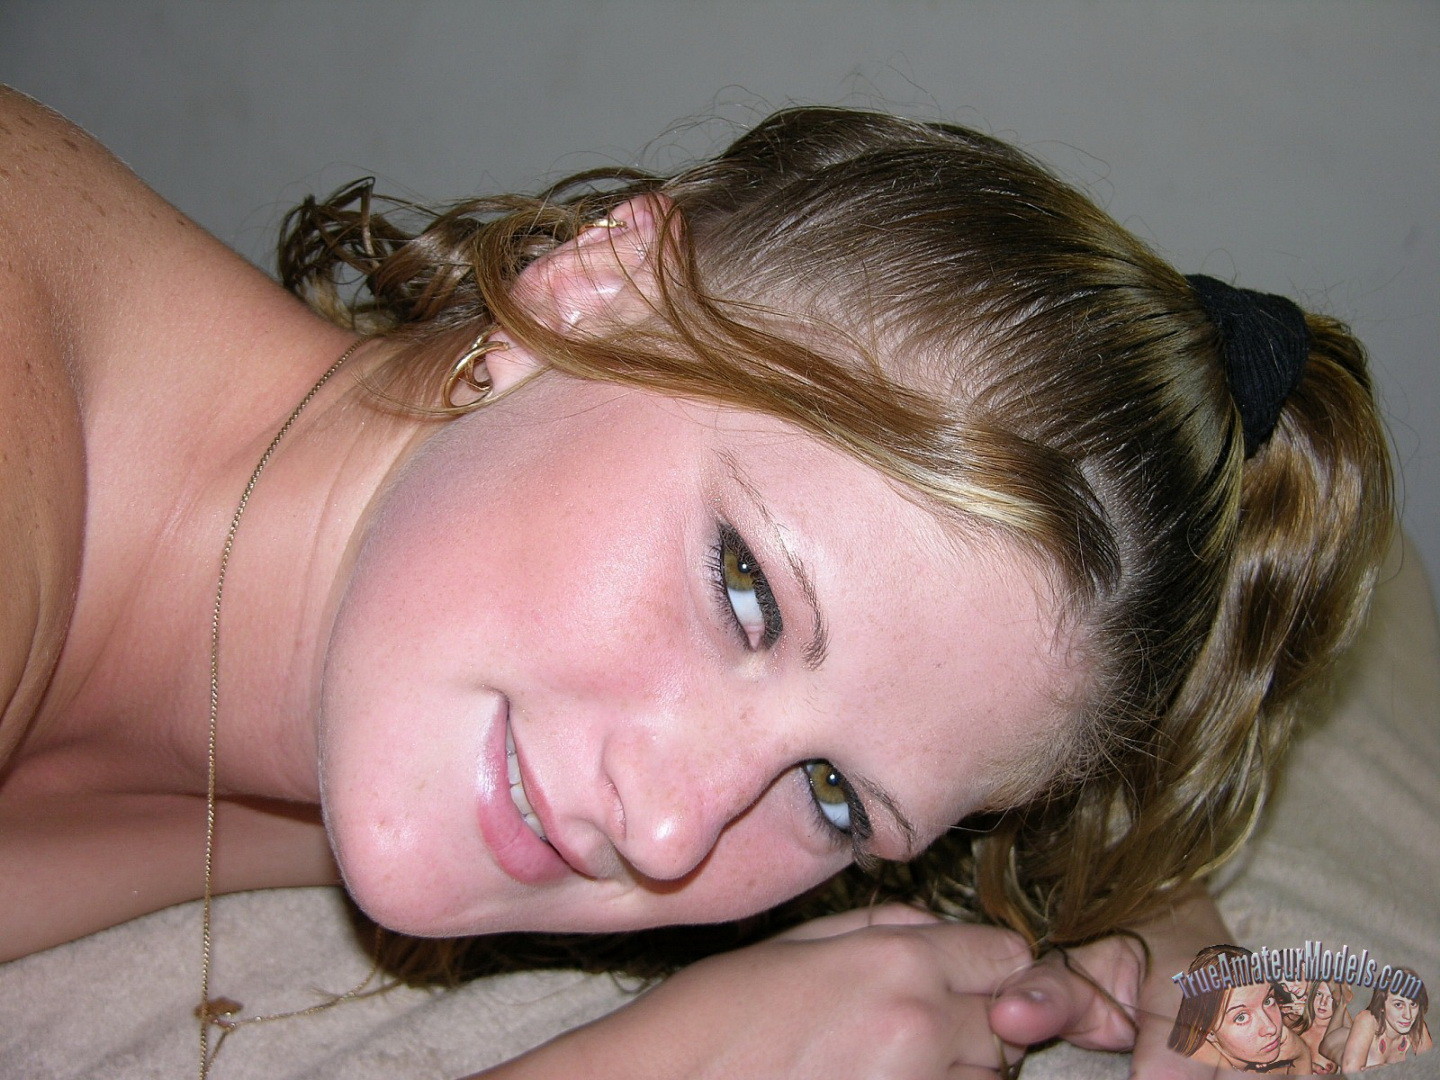 wpid-chubby-blonde-southern-amateur-deanna-strips-and-plays13.jpg